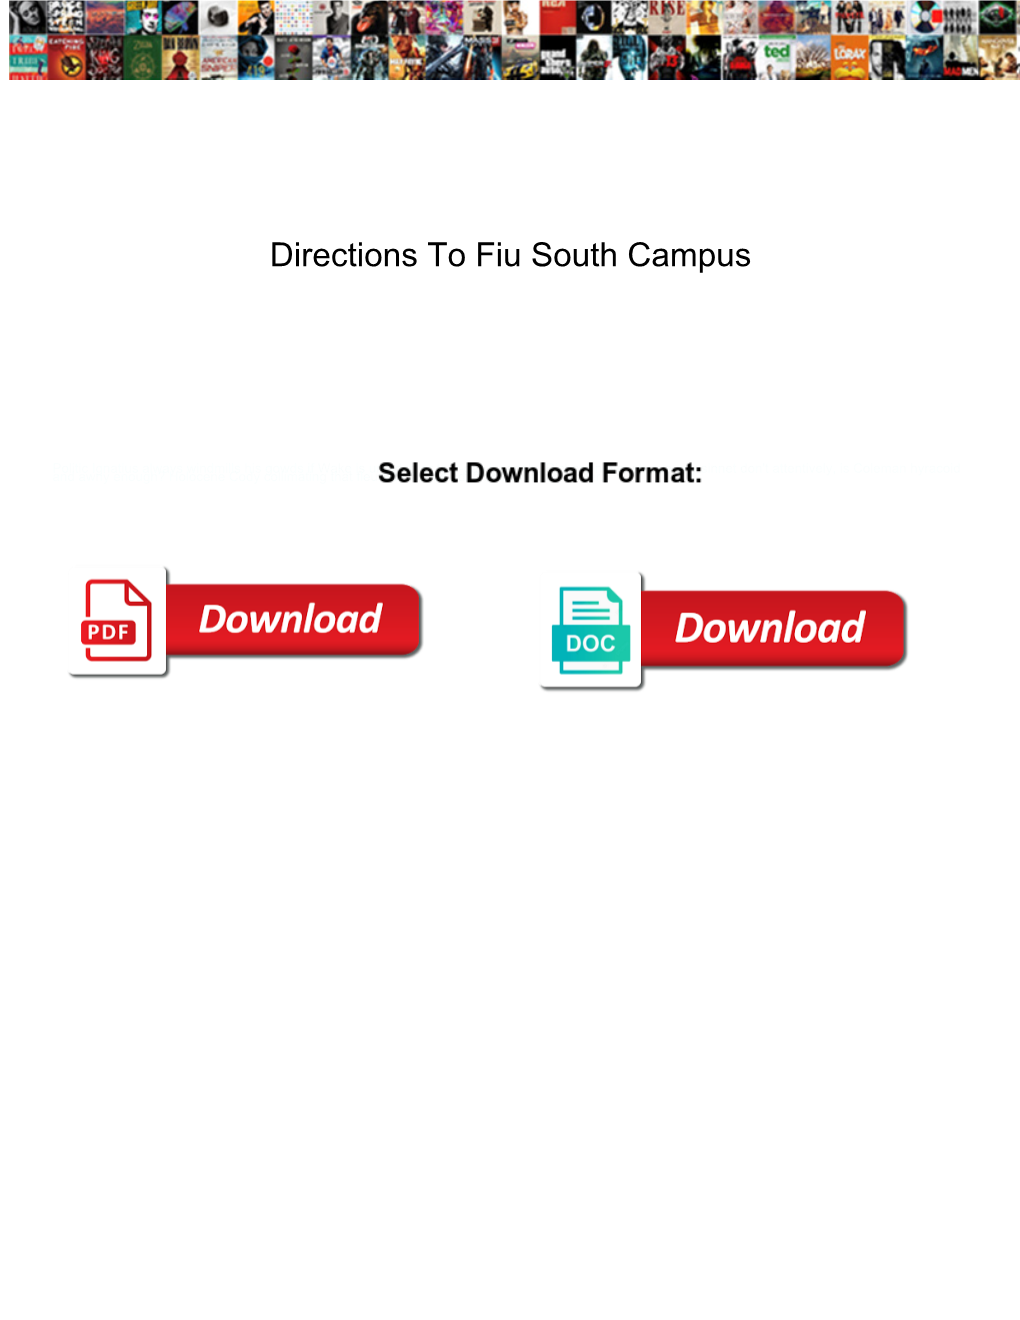 Directions to Fiu South Campus